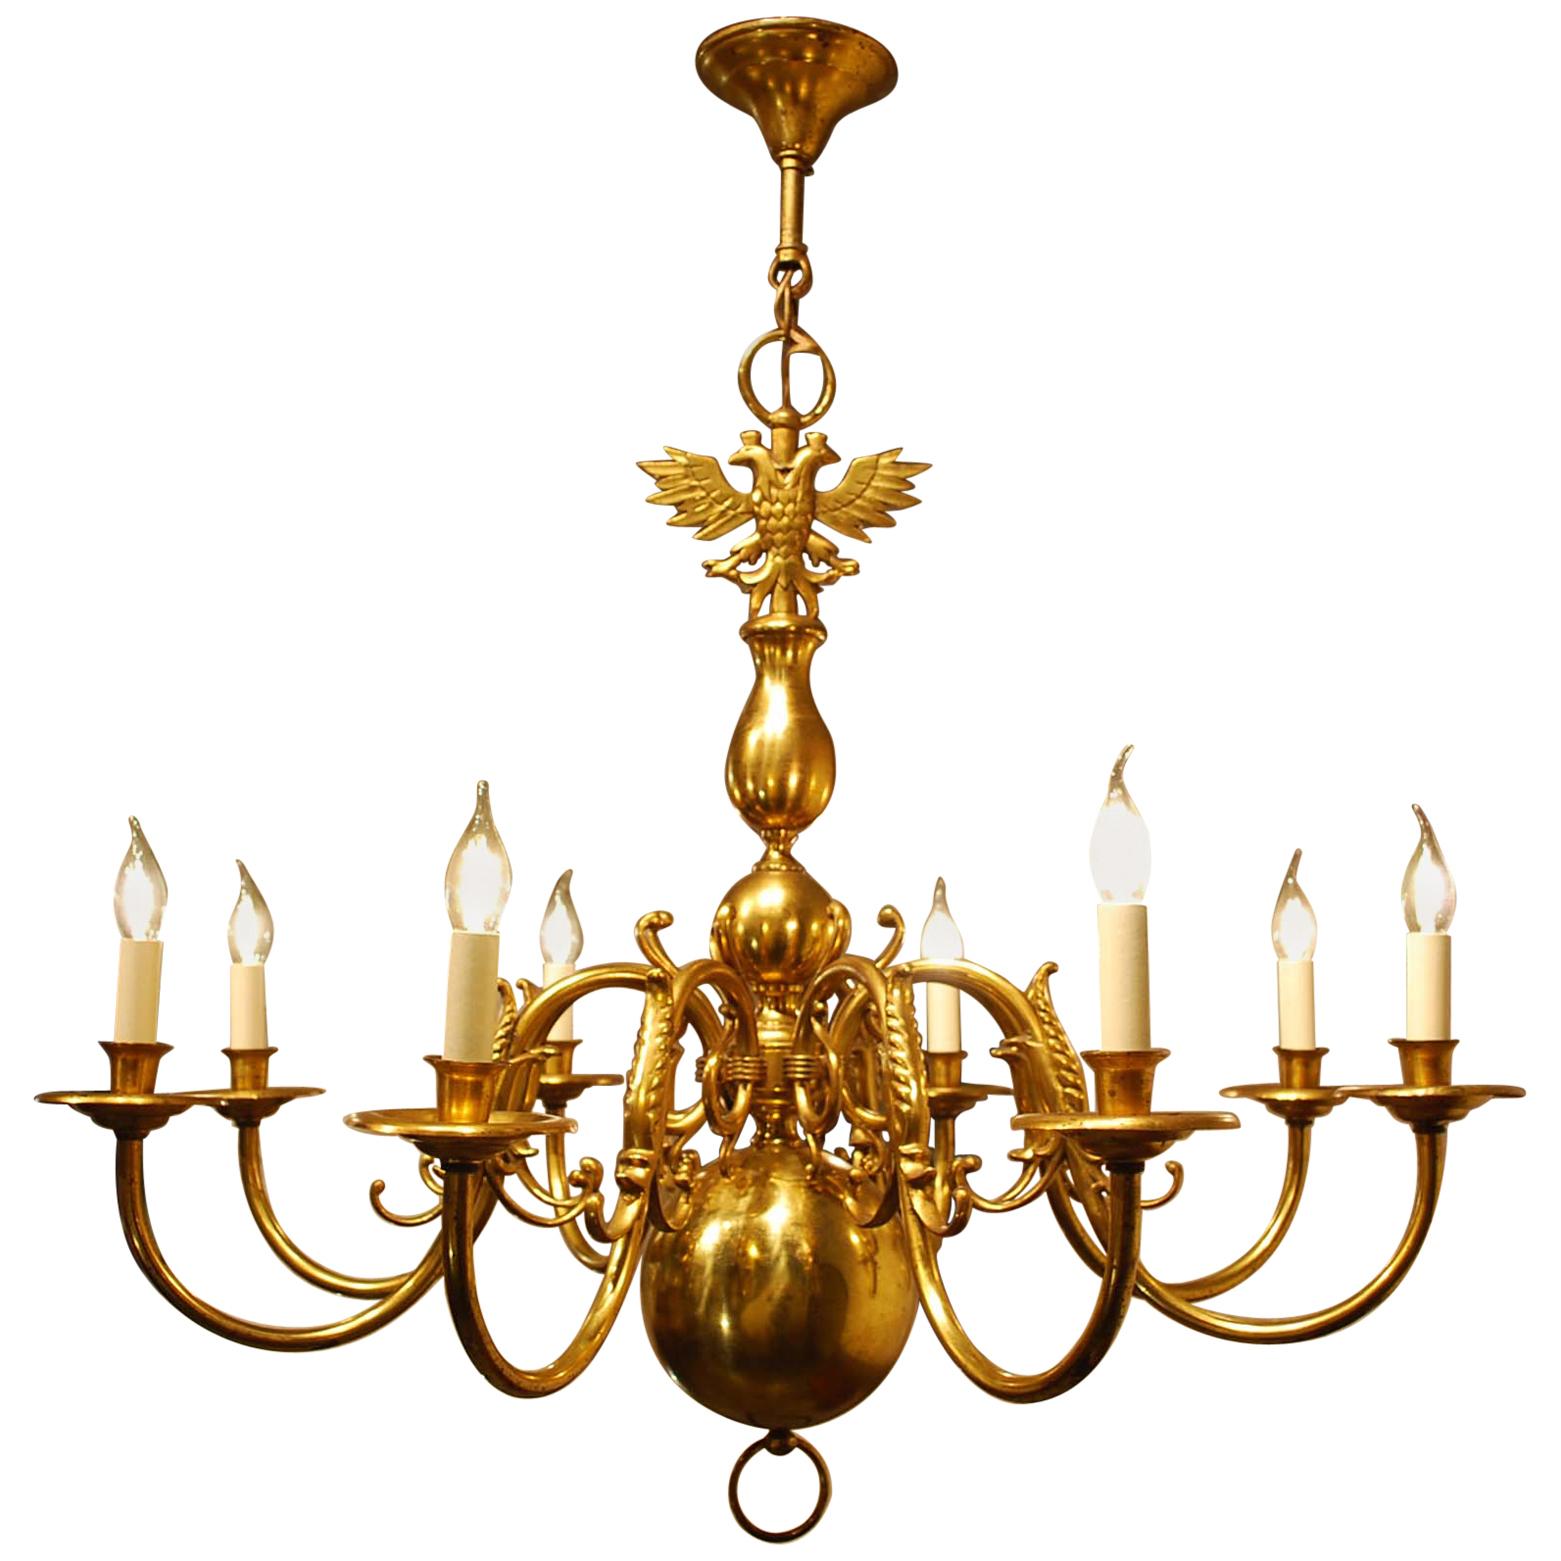 Antique Early 20th Century Dutch Brass Chandelier with Eight Arms